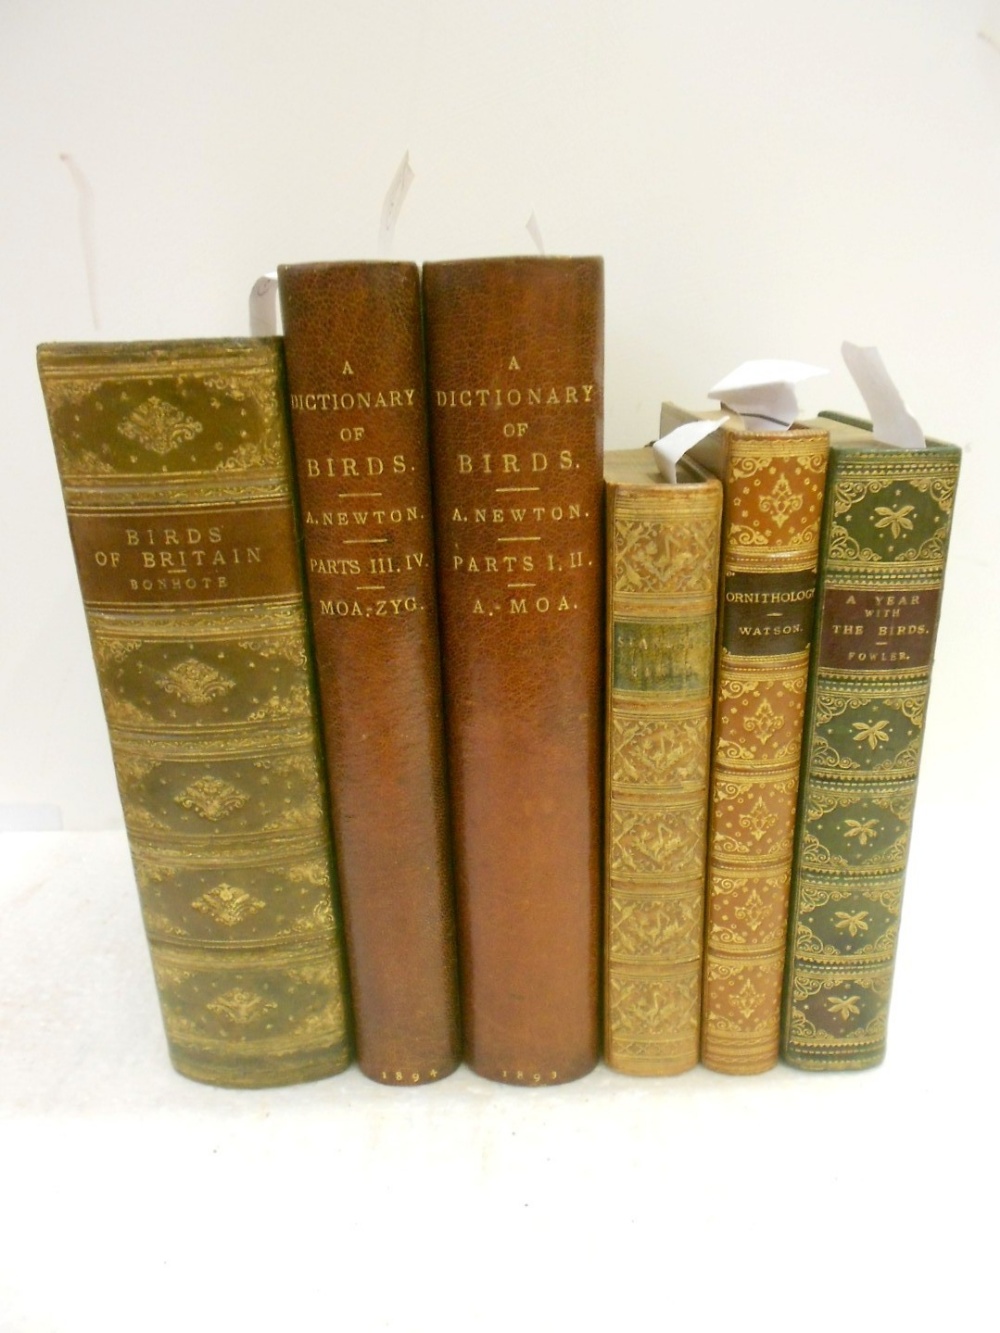 NEWTON (Alfred) A Dictionary of Birds, 1893-94, four vols in two, t.e.g., half morocco by